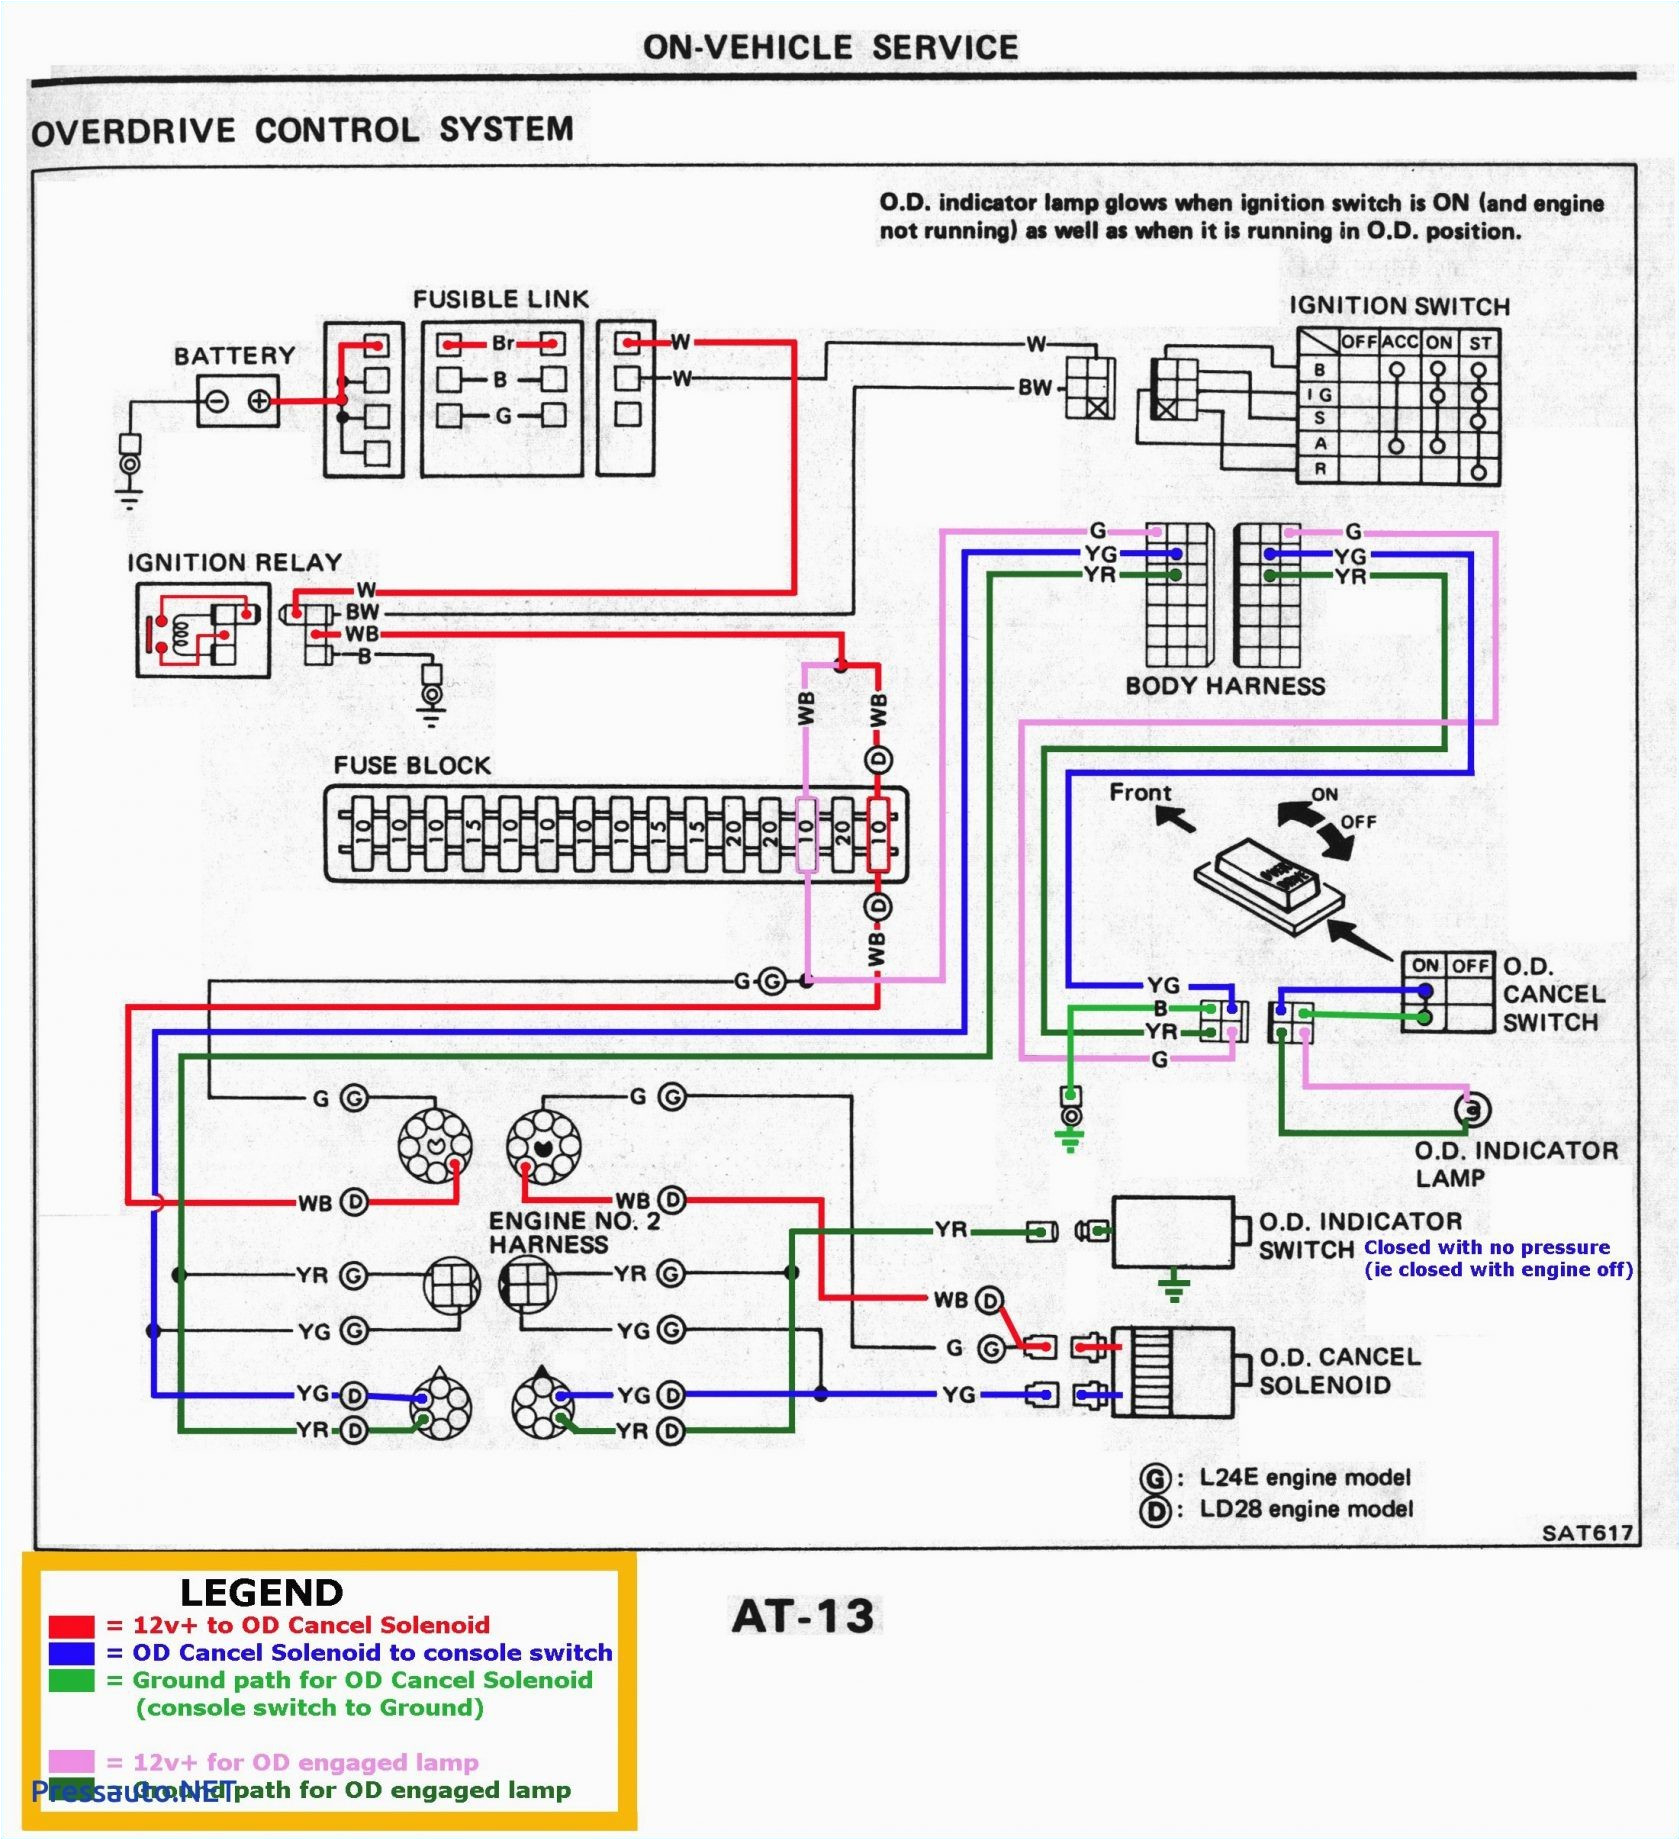 wiring schematics height off floor wiring diagram article review autoshop101 wiring diagrams